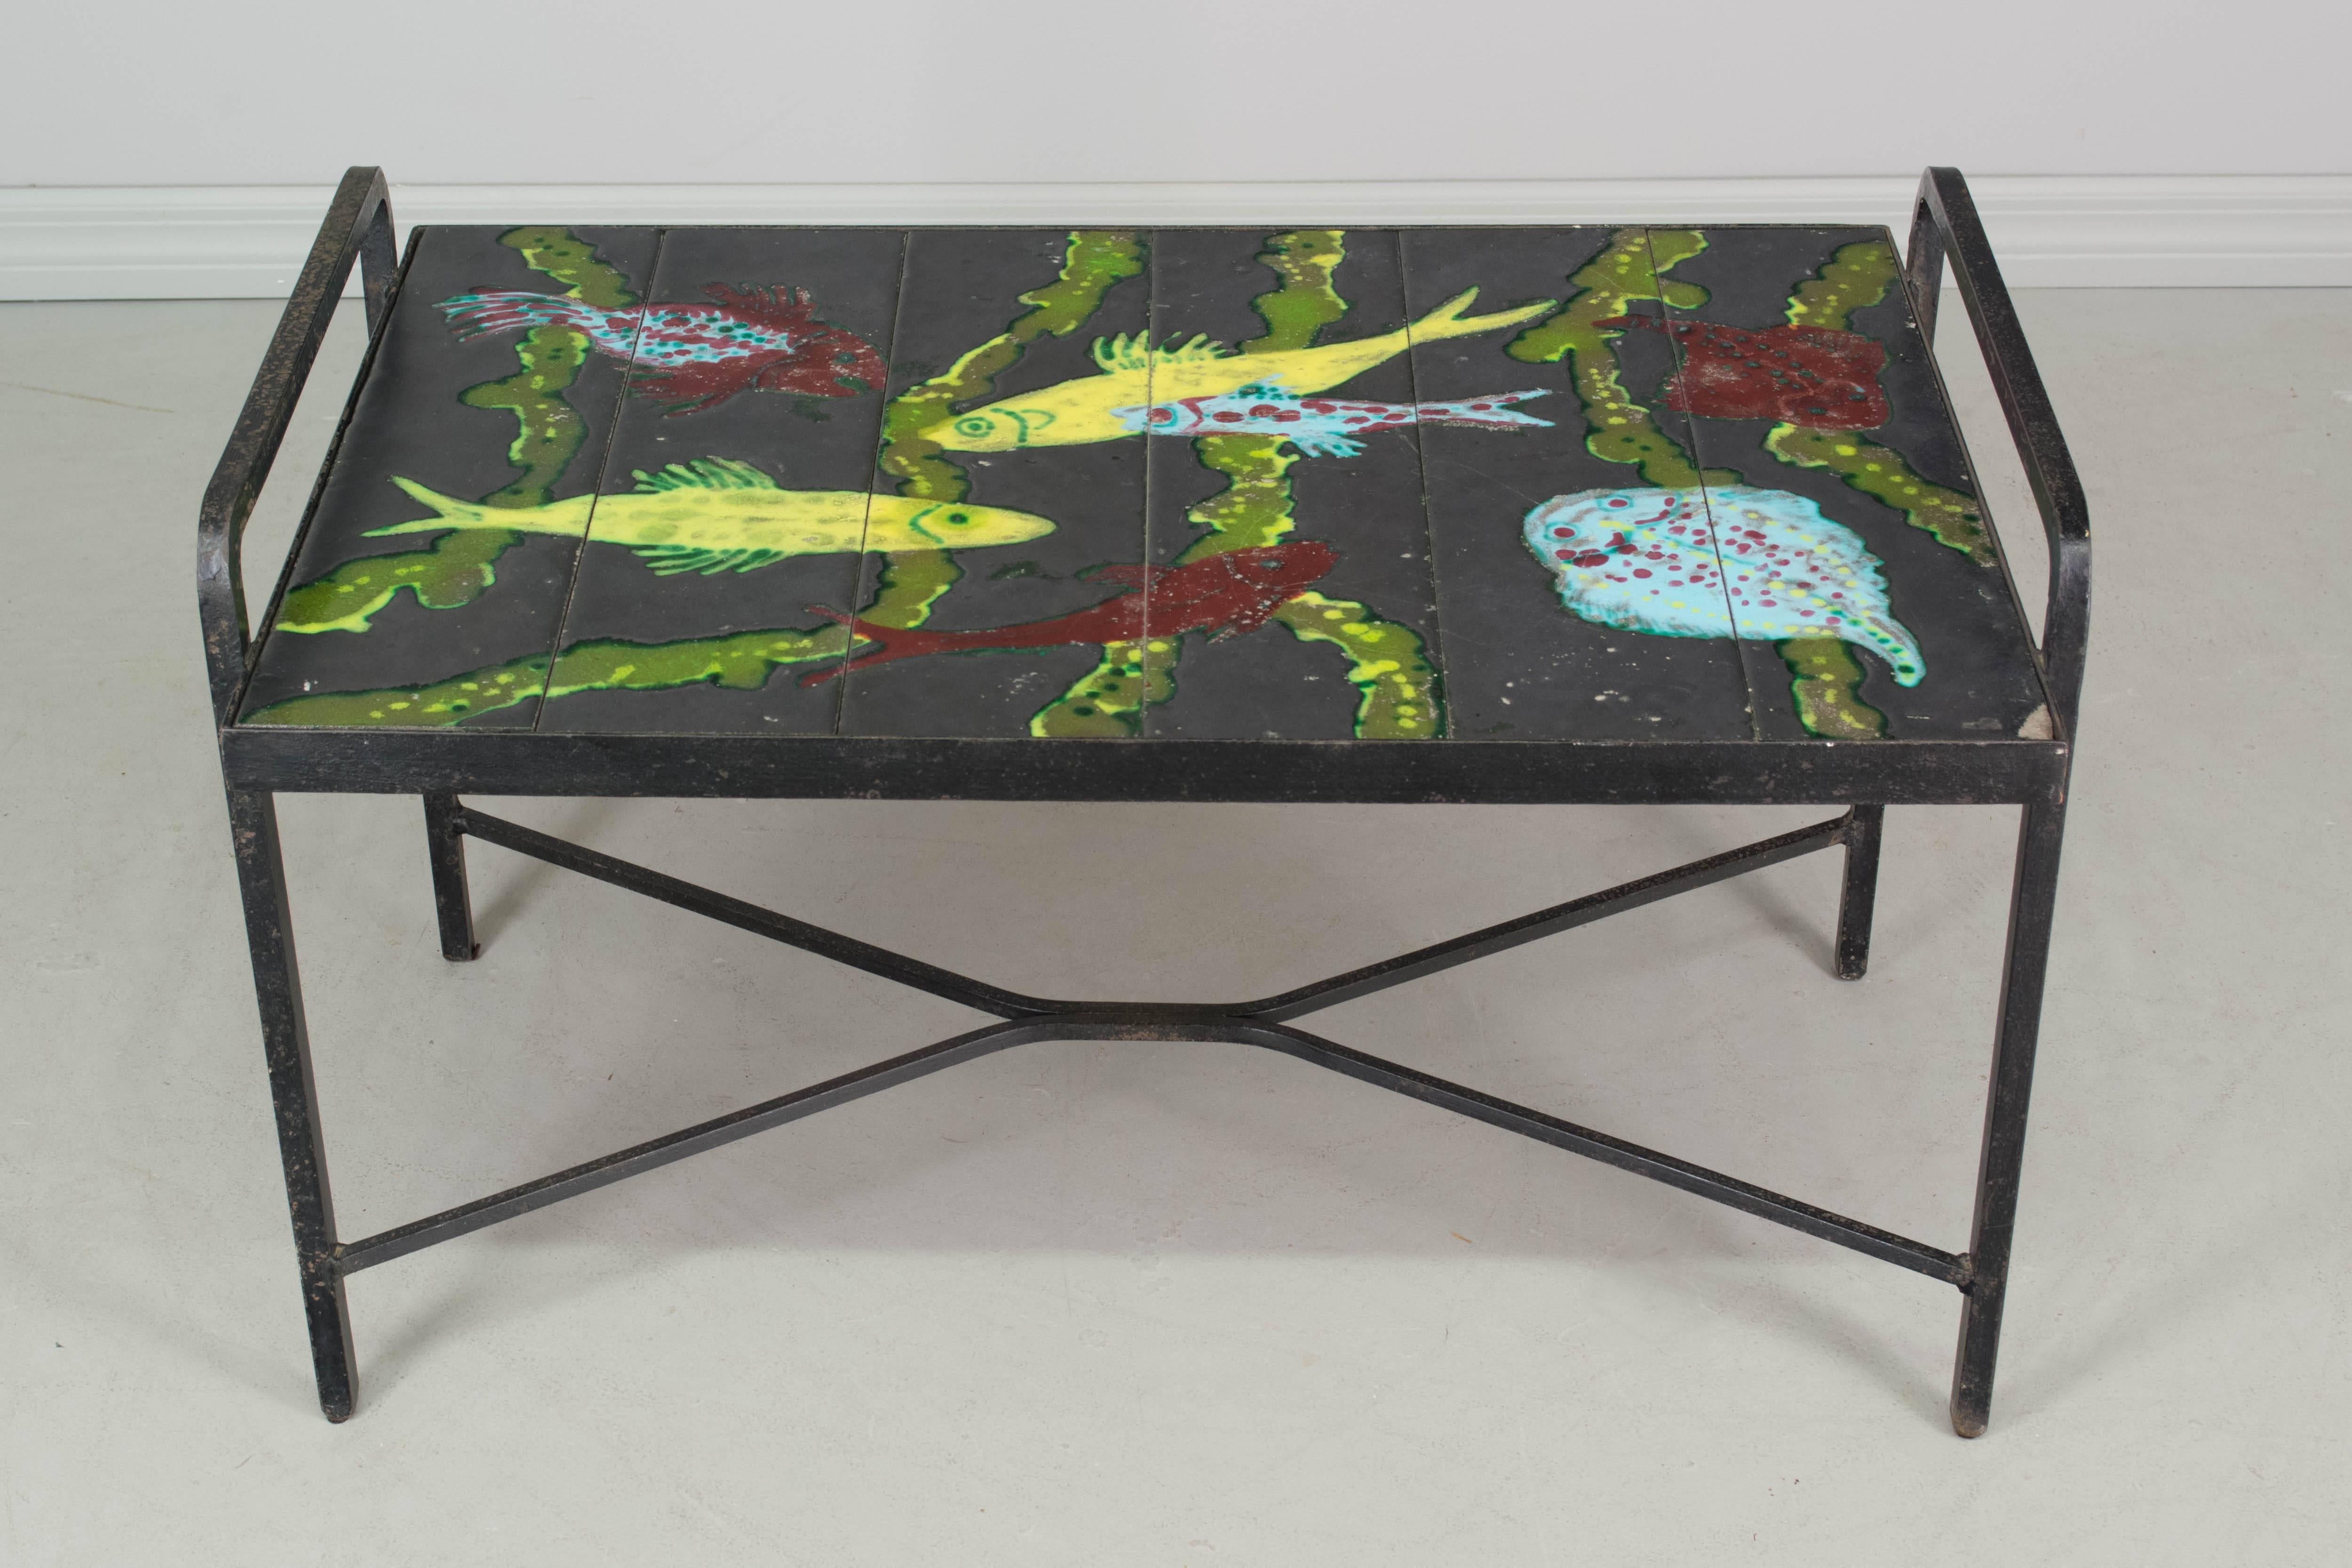 Whimsical French Mid-Century Modern tile-top table with colorful enameled fish, attributed to Jacques Adnet. Top is comprised of six lava stone tiles that fit into a black painted iron base. Color is vibrant, but there are some cracks in the enamel